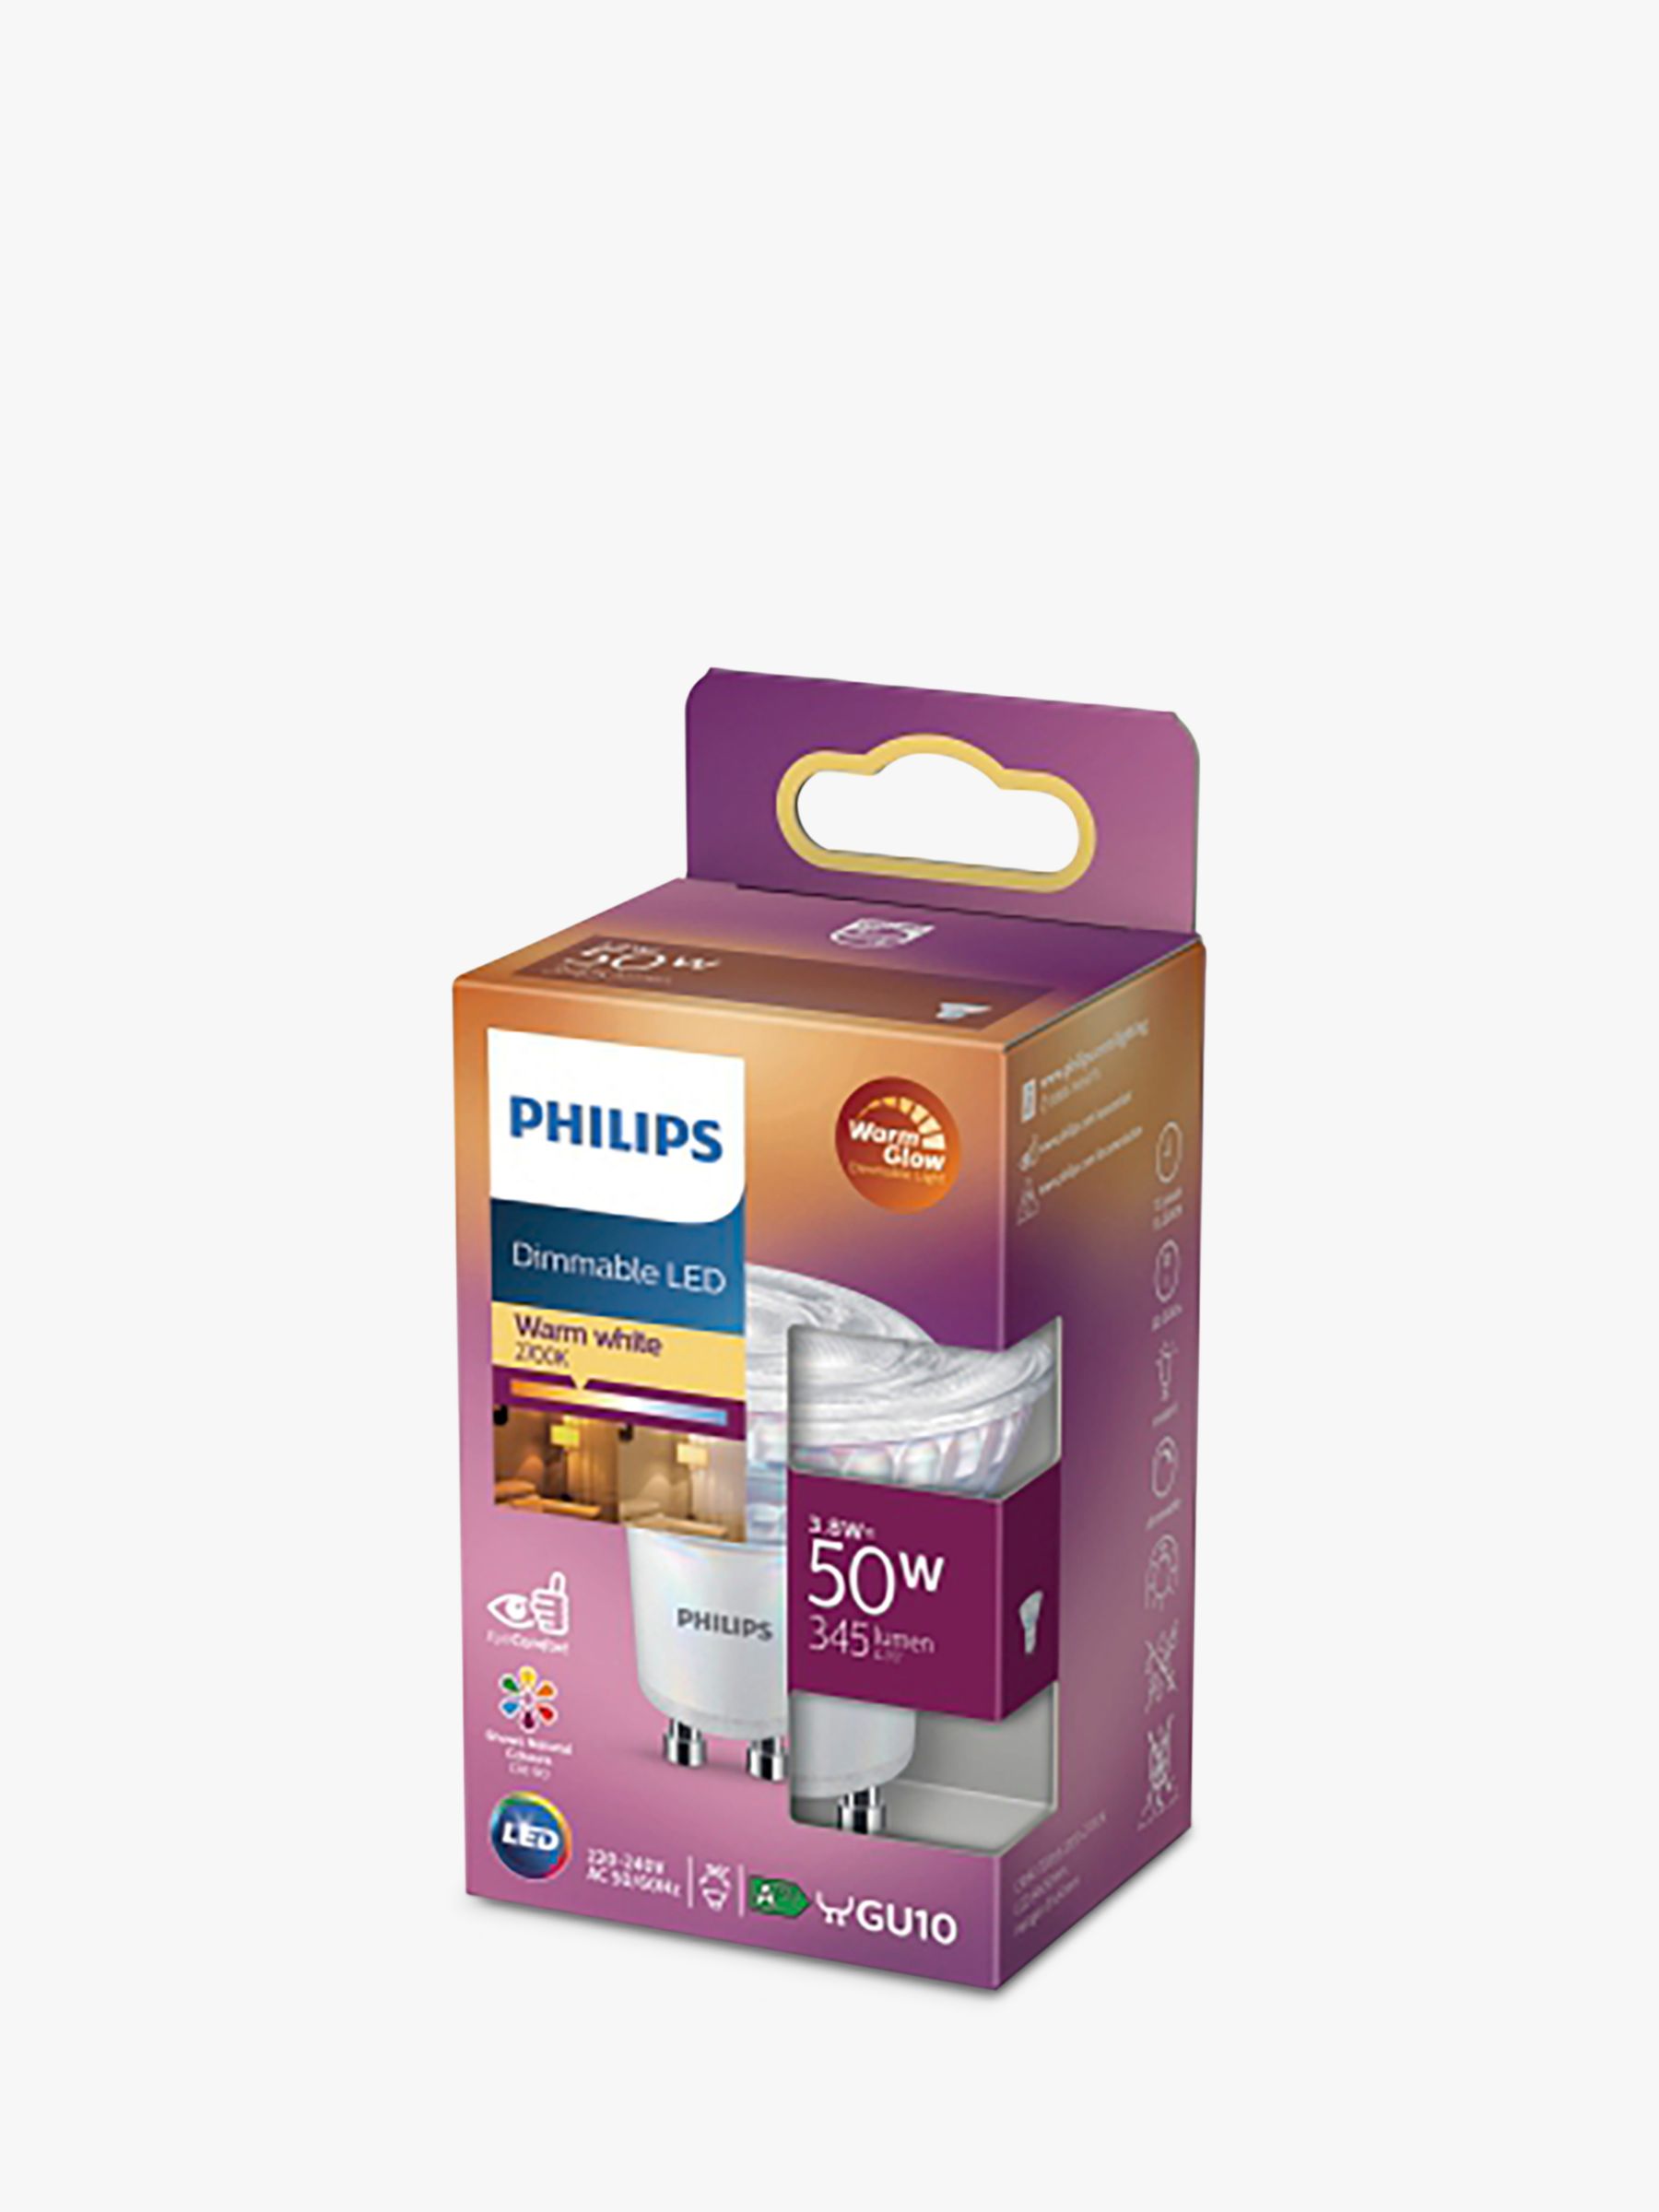 Photo of Philips 3.8w led warm glow gu10 dimmable light bulb